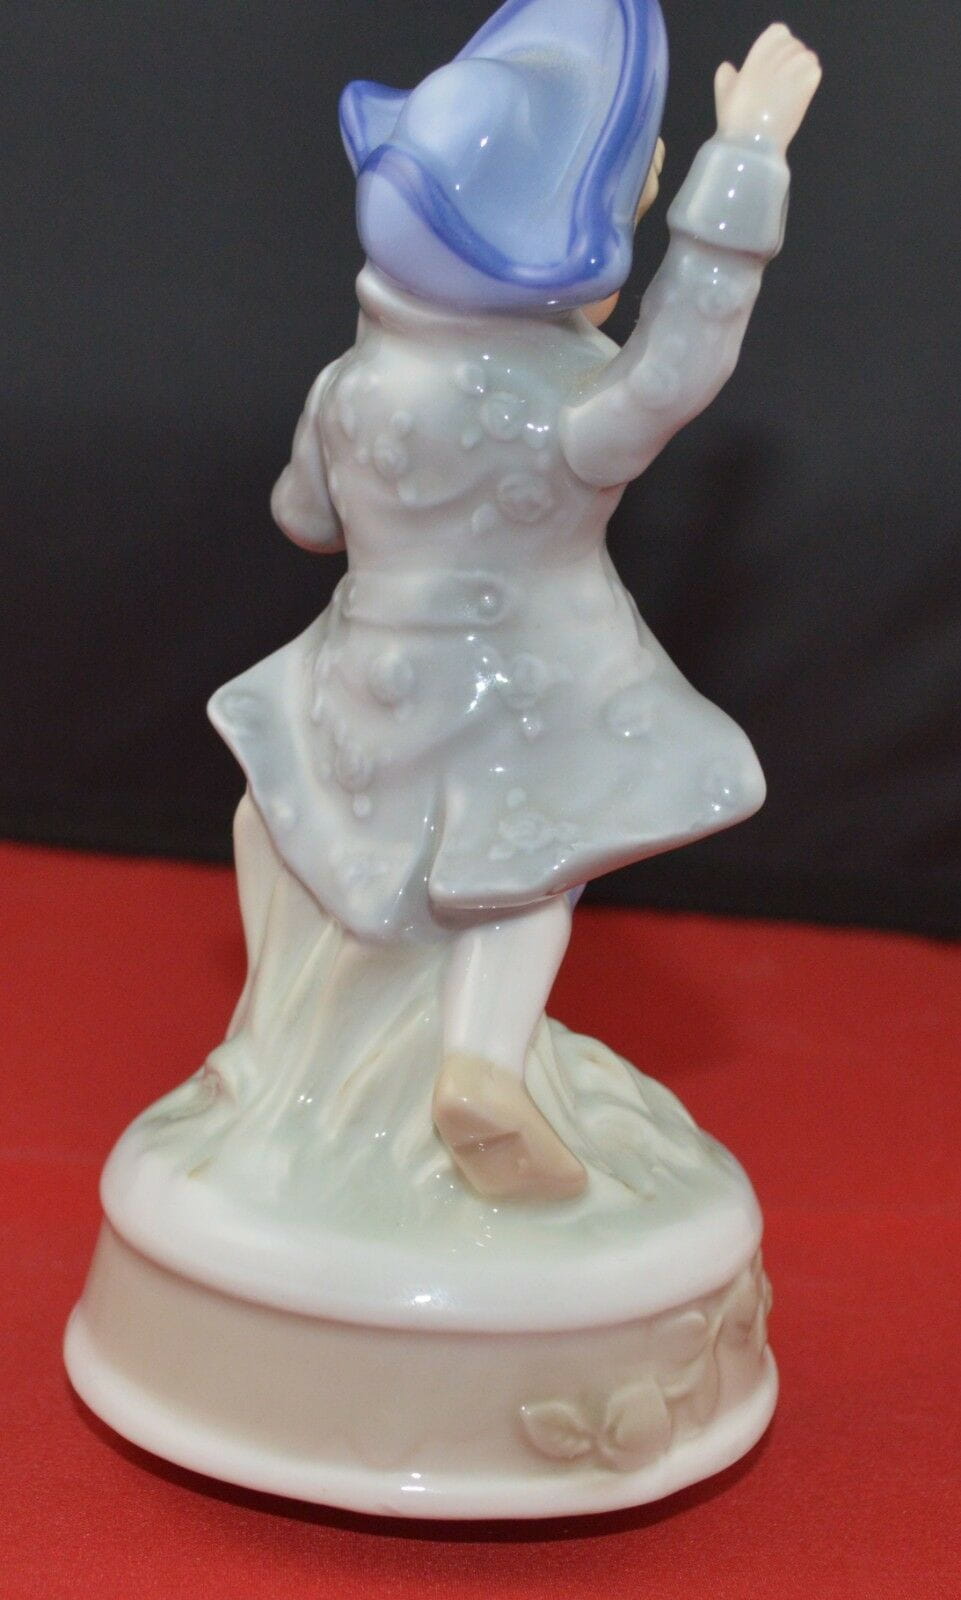 DECORATIVE MUSICAL FIGURINE BOY SITTING ON A TREE STUMP(PREVIOUSLY OWNED) GOOD CONDITION - TMD167207